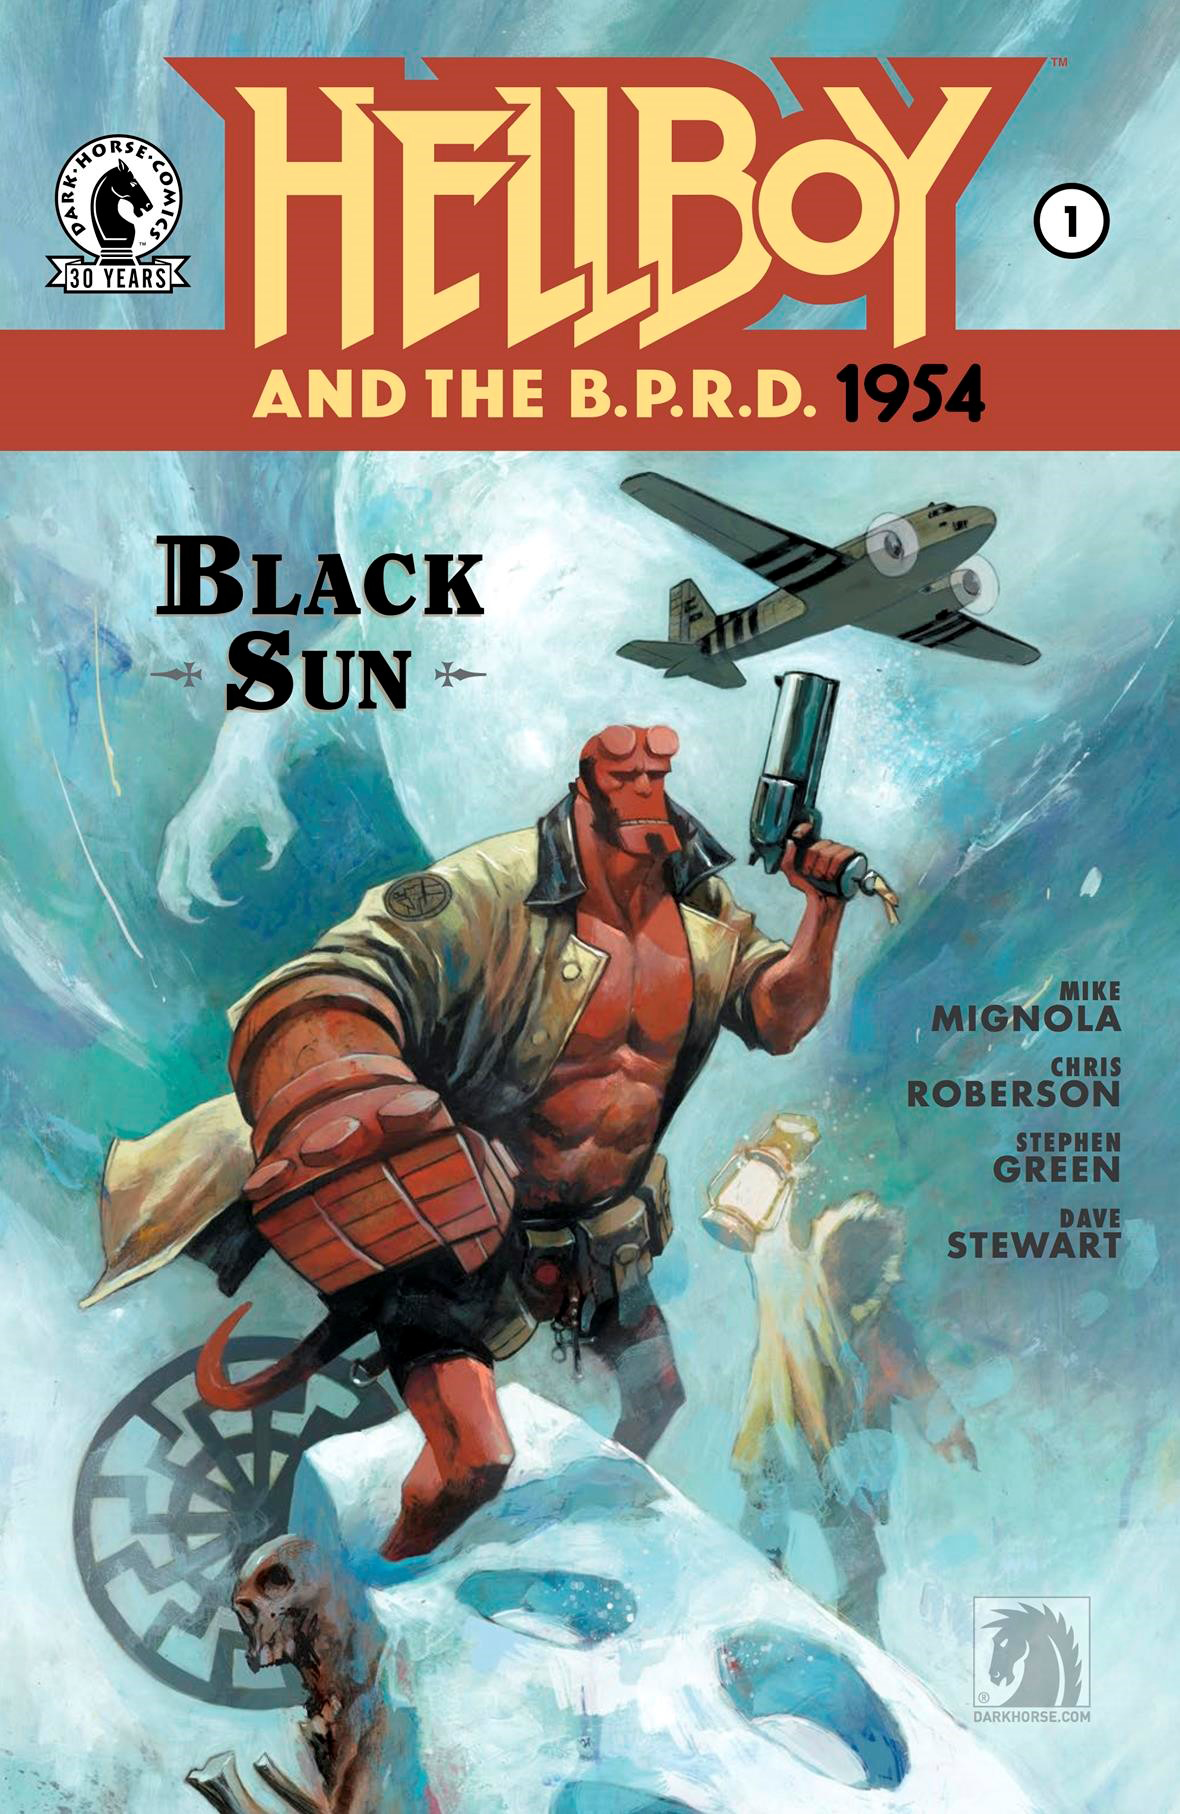 HELLBOY AND BPRD 1954 #1 (OF 2) BLACK SUN